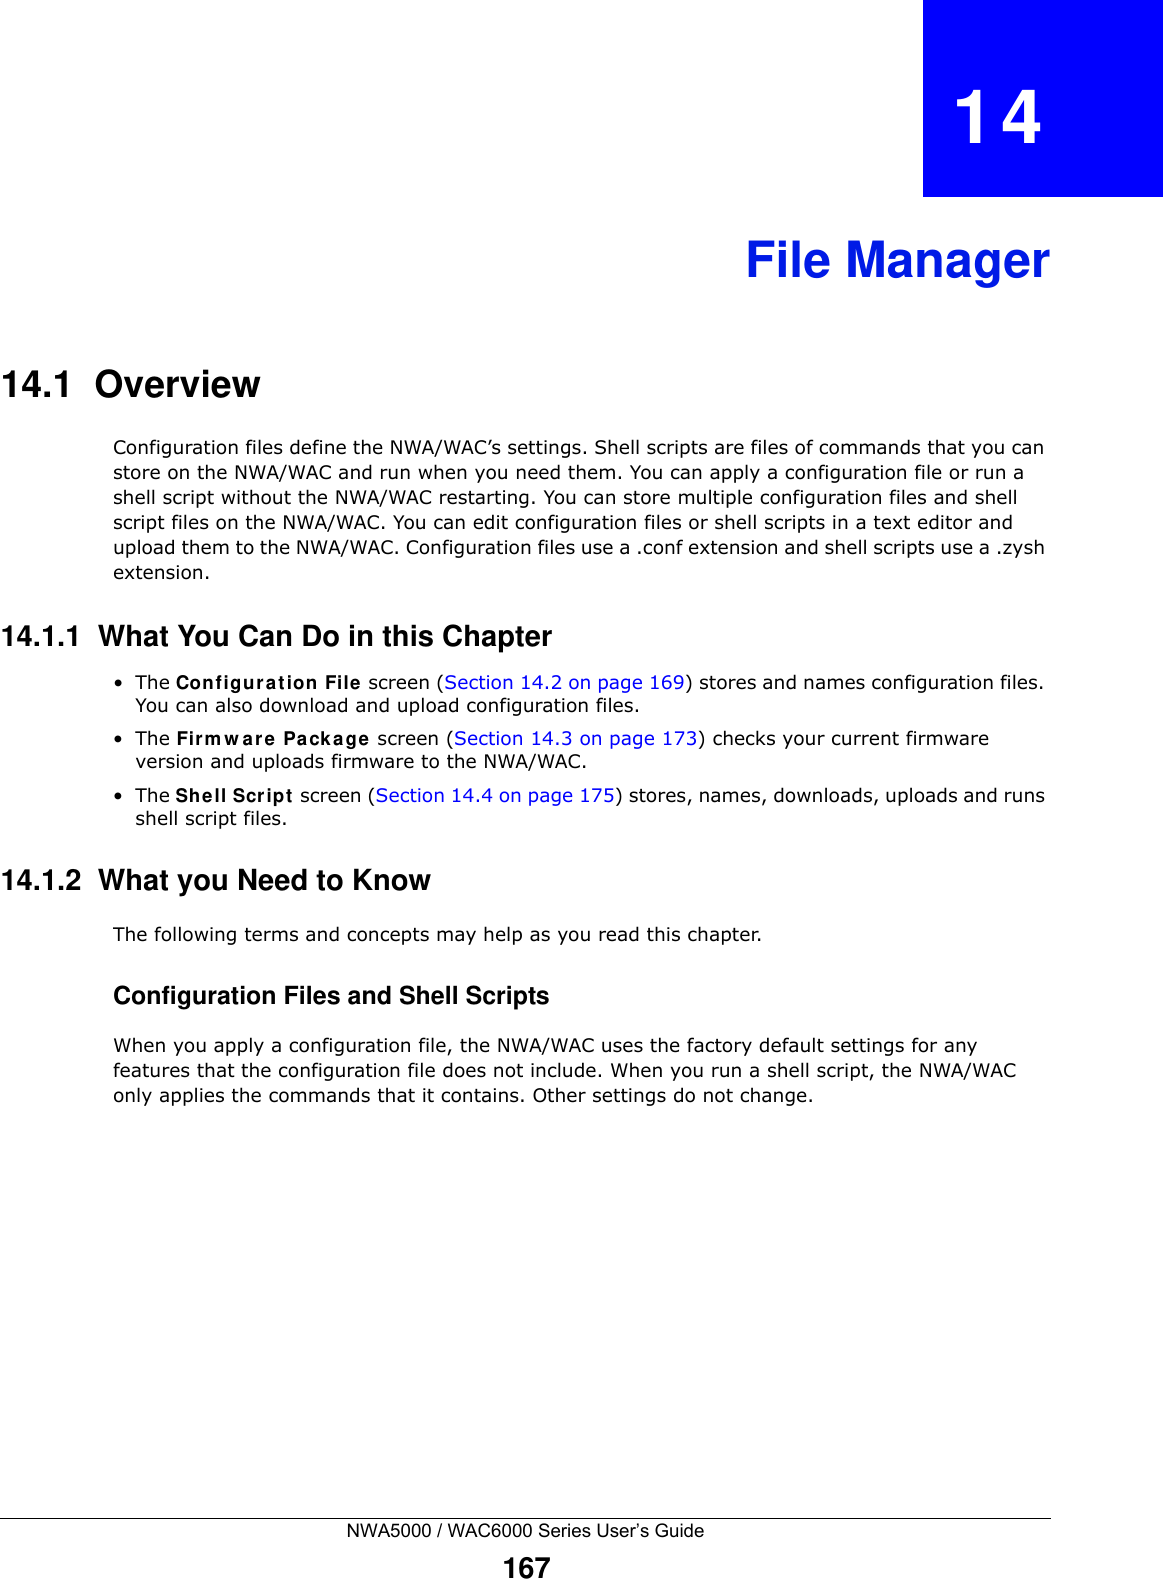 NWA5000 / WAC6000 Series User’s Guide167CHAPTER   14File Manager14.1  OverviewConfiguration files define the NWA/WAC’s settings. Shell scripts are files of commands that you can store on the NWA/WAC and run when you need them. You can apply a configuration file or run a shell script without the NWA/WAC restarting. You can store multiple configuration files and shell script files on the NWA/WAC. You can edit configuration files or shell scripts in a text editor and upload them to the NWA/WAC. Configuration files use a .conf extension and shell scripts use a .zysh extension.14.1.1  What You Can Do in this Chapter•The Configuration File screen (Section 14.2 on page 169) stores and names configuration files. You can also download and upload configuration files.•The Firmware Package screen (Section 14.3 on page 173) checks your current firmware version and uploads firmware to the NWA/WAC.•The Shell Script screen (Section 14.4 on page 175) stores, names, downloads, uploads and runs shell script files. 14.1.2  What you Need to KnowThe following terms and concepts may help as you read this chapter.Configuration Files and Shell ScriptsWhen you apply a configuration file, the NWA/WAC uses the factory default settings for any features that the configuration file does not include. When you run a shell script, the NWA/WAC only applies the commands that it contains. Other settings do not change.